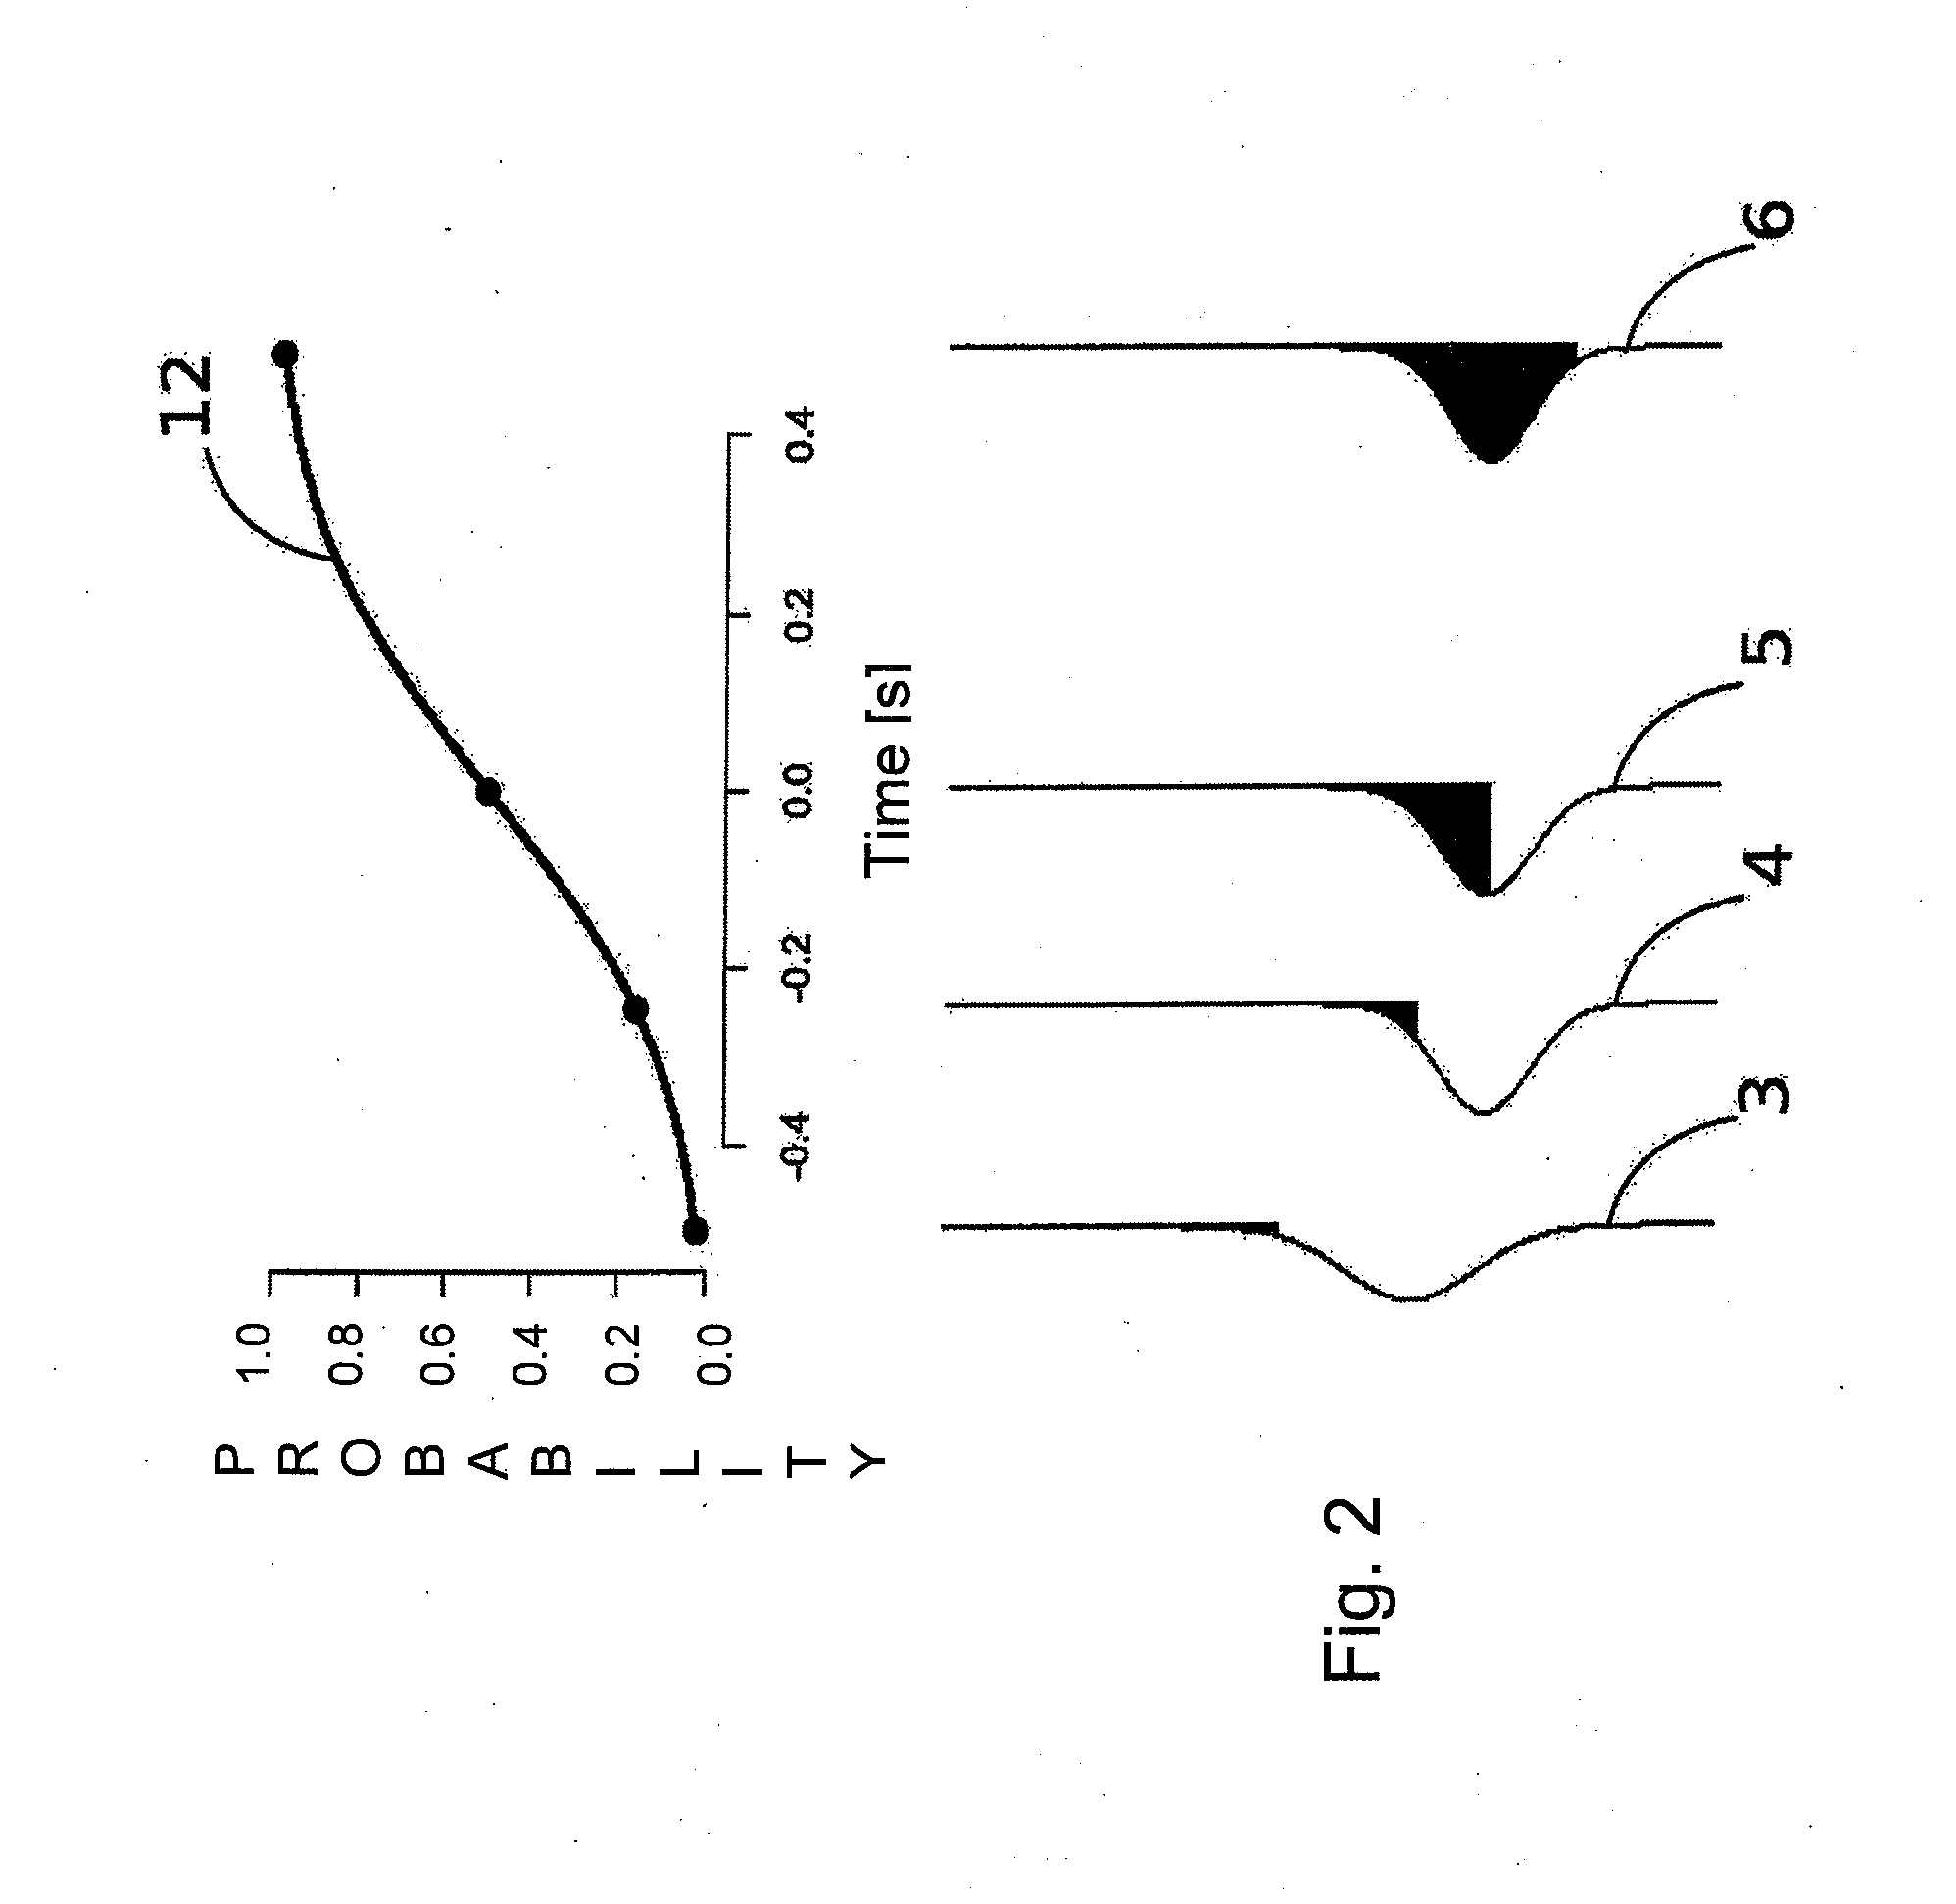 Process for the automatic control of a respirator